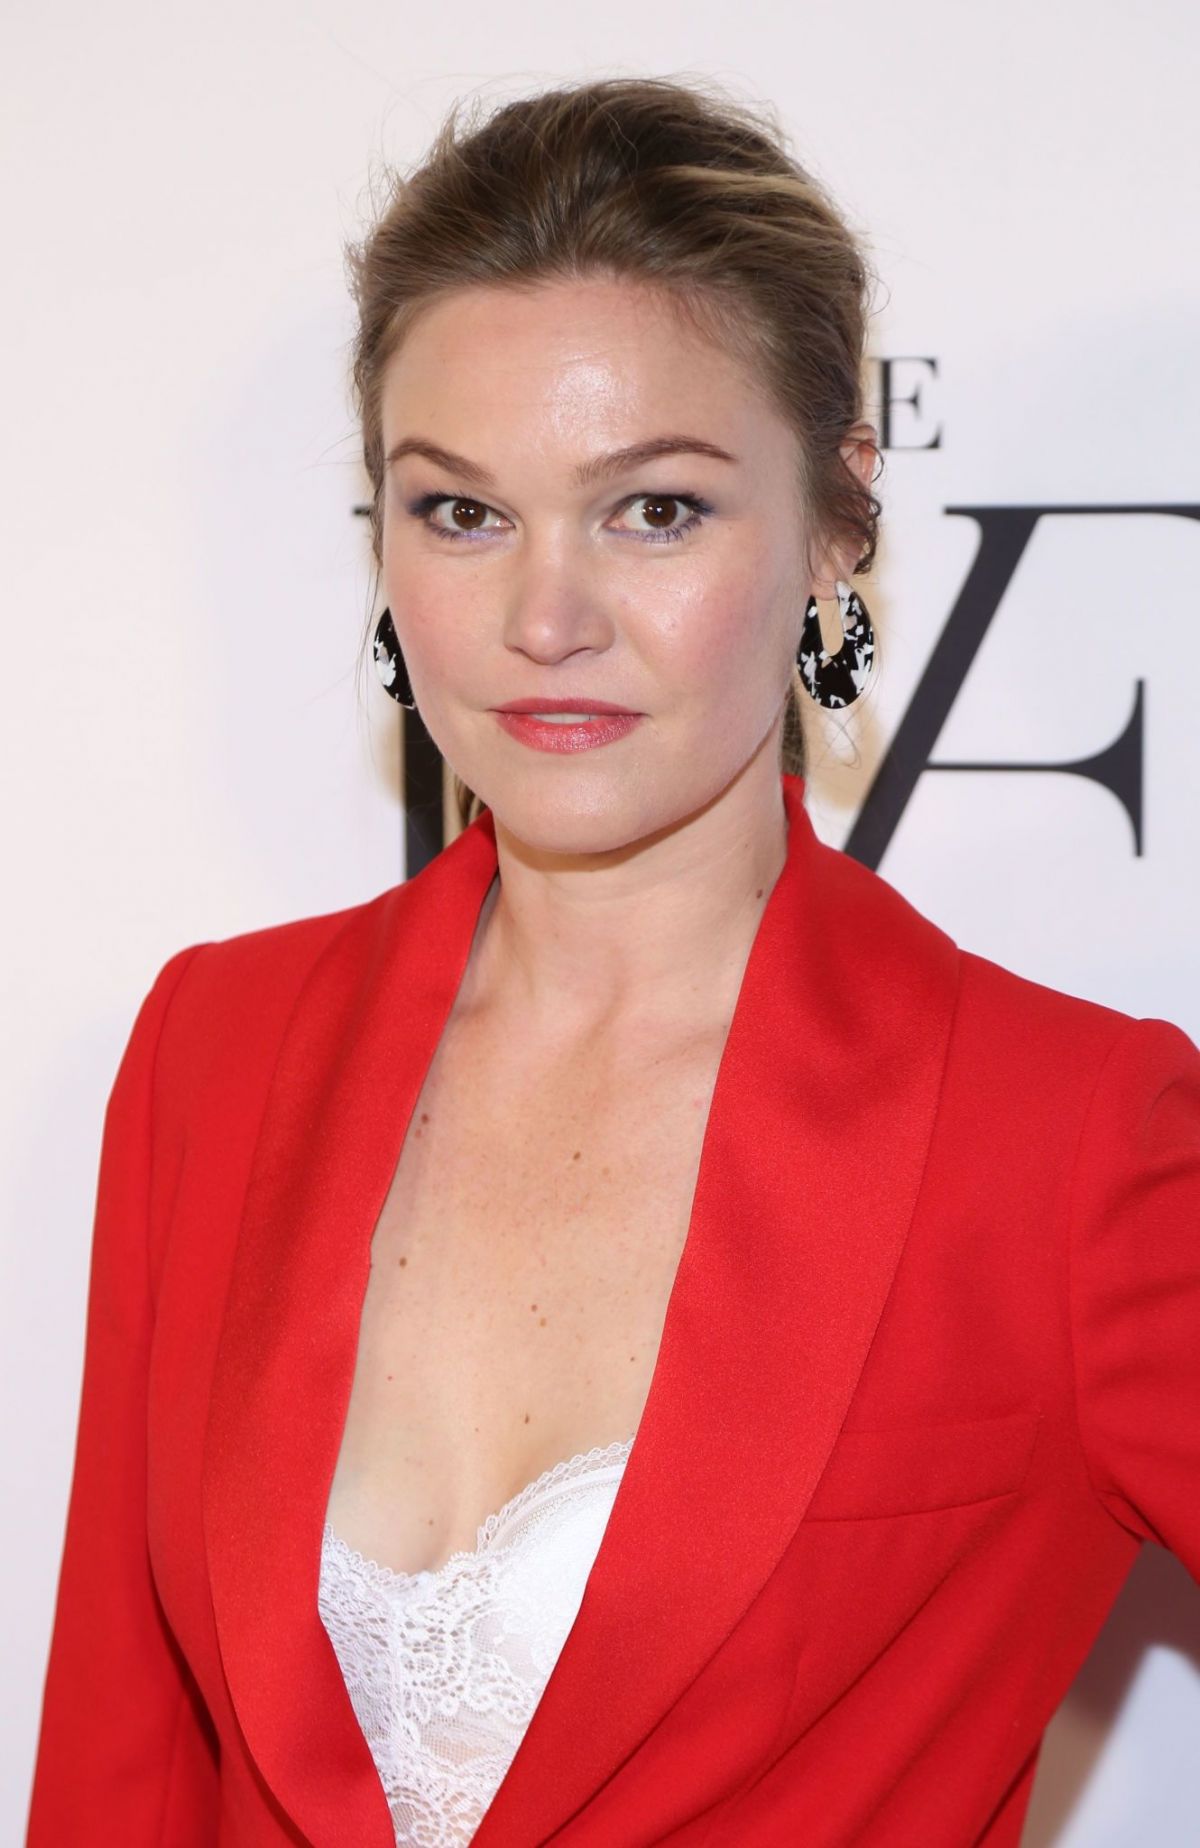 Julia Stiles At Hollywood Reporter S Most Powerful People In Media 2019 In New York 04 11 2019 3 